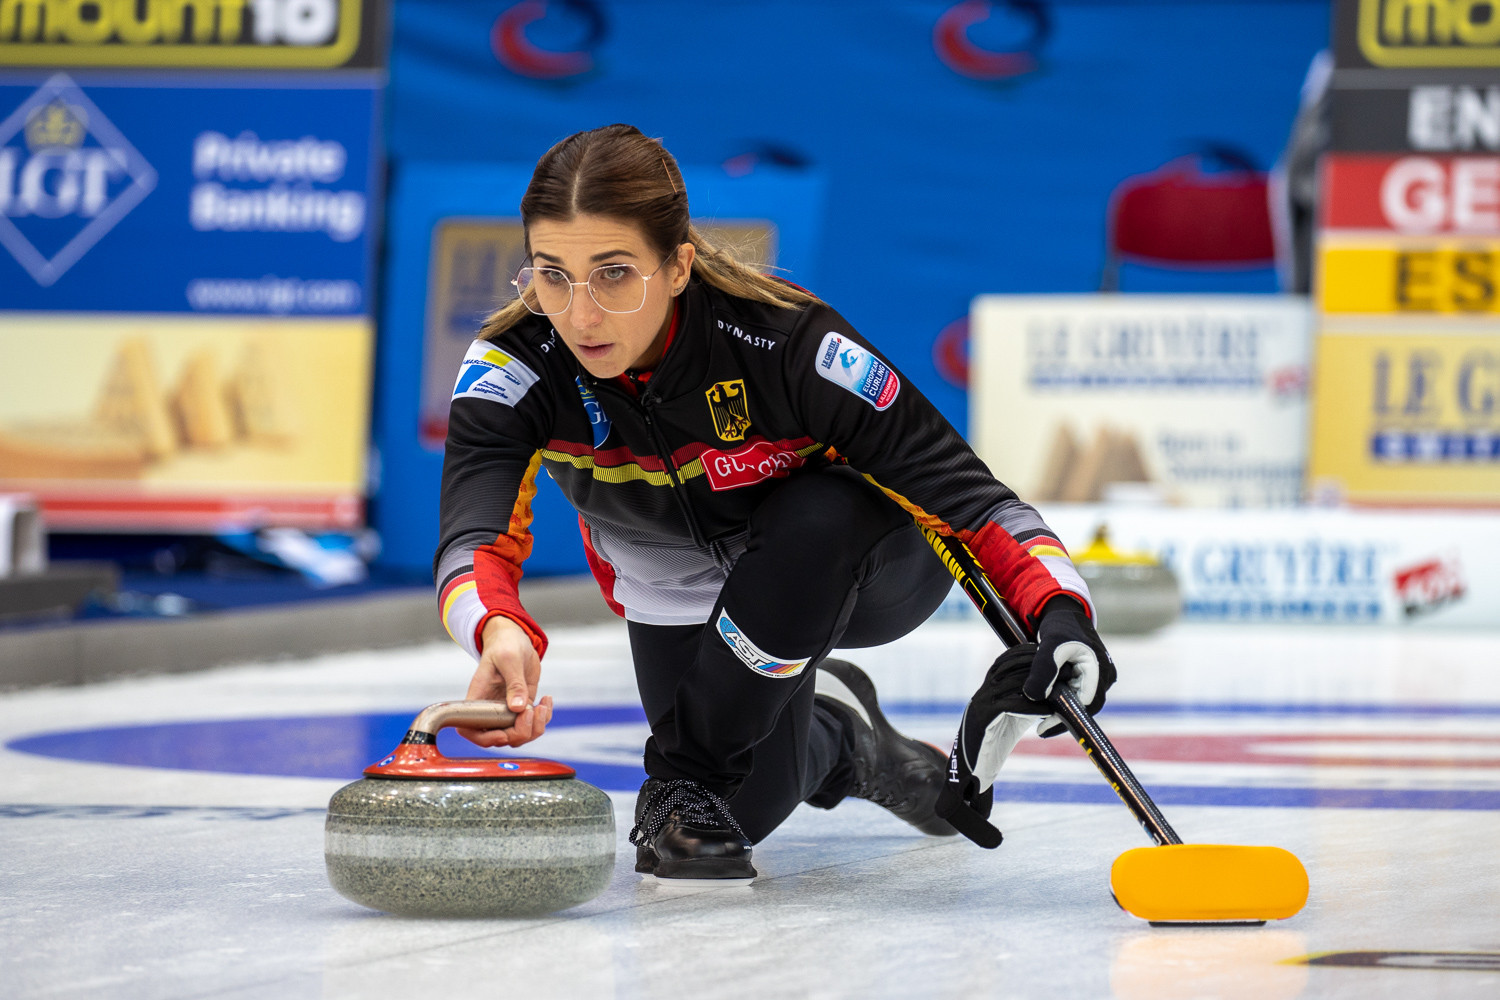 Daniela Jentsch helped Germany to bronze at the European Curling Championships today ©WCF/Steve Seixeiro